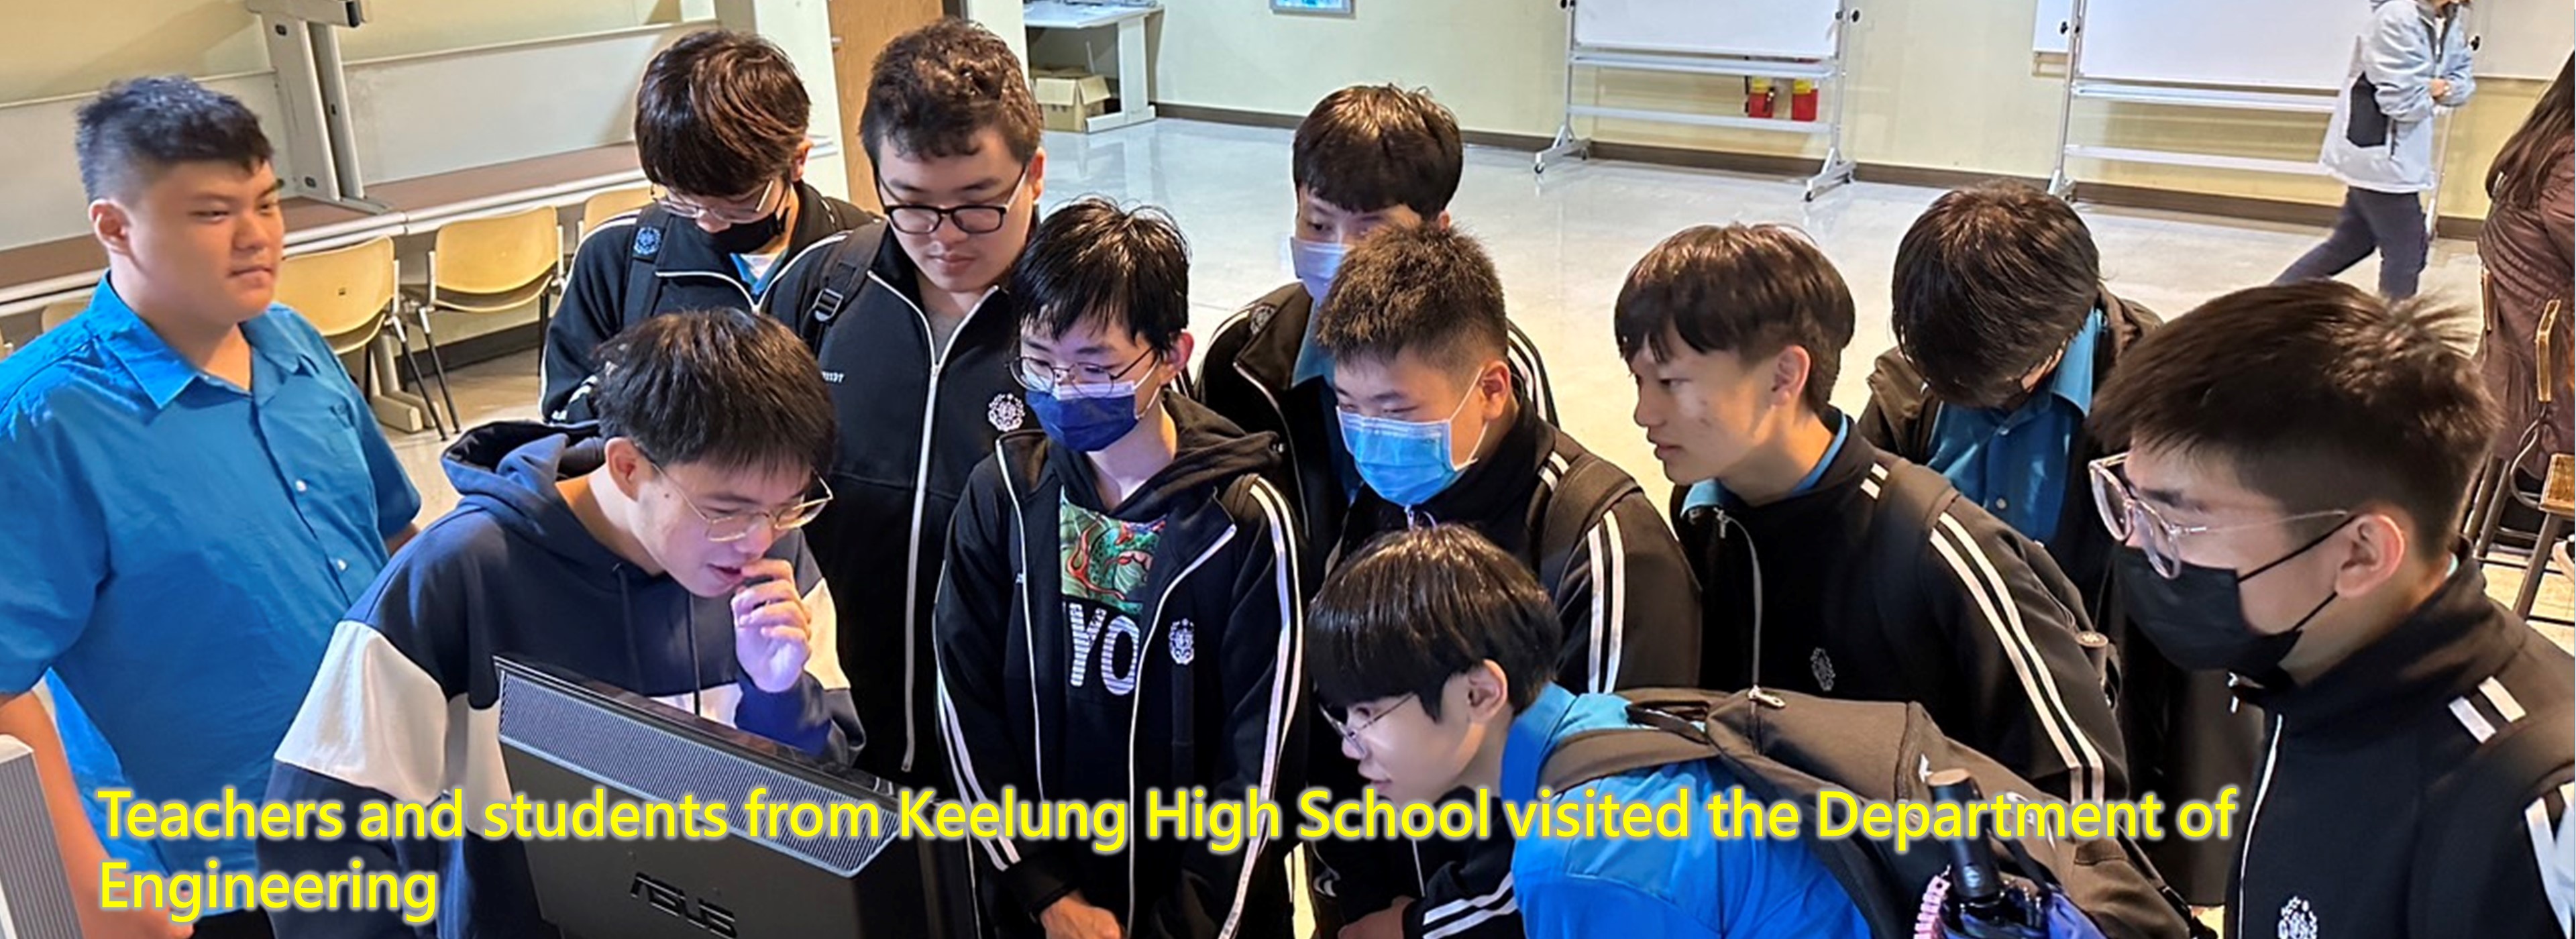 Teachers and students from Keelung High School visited the Department of Engineering